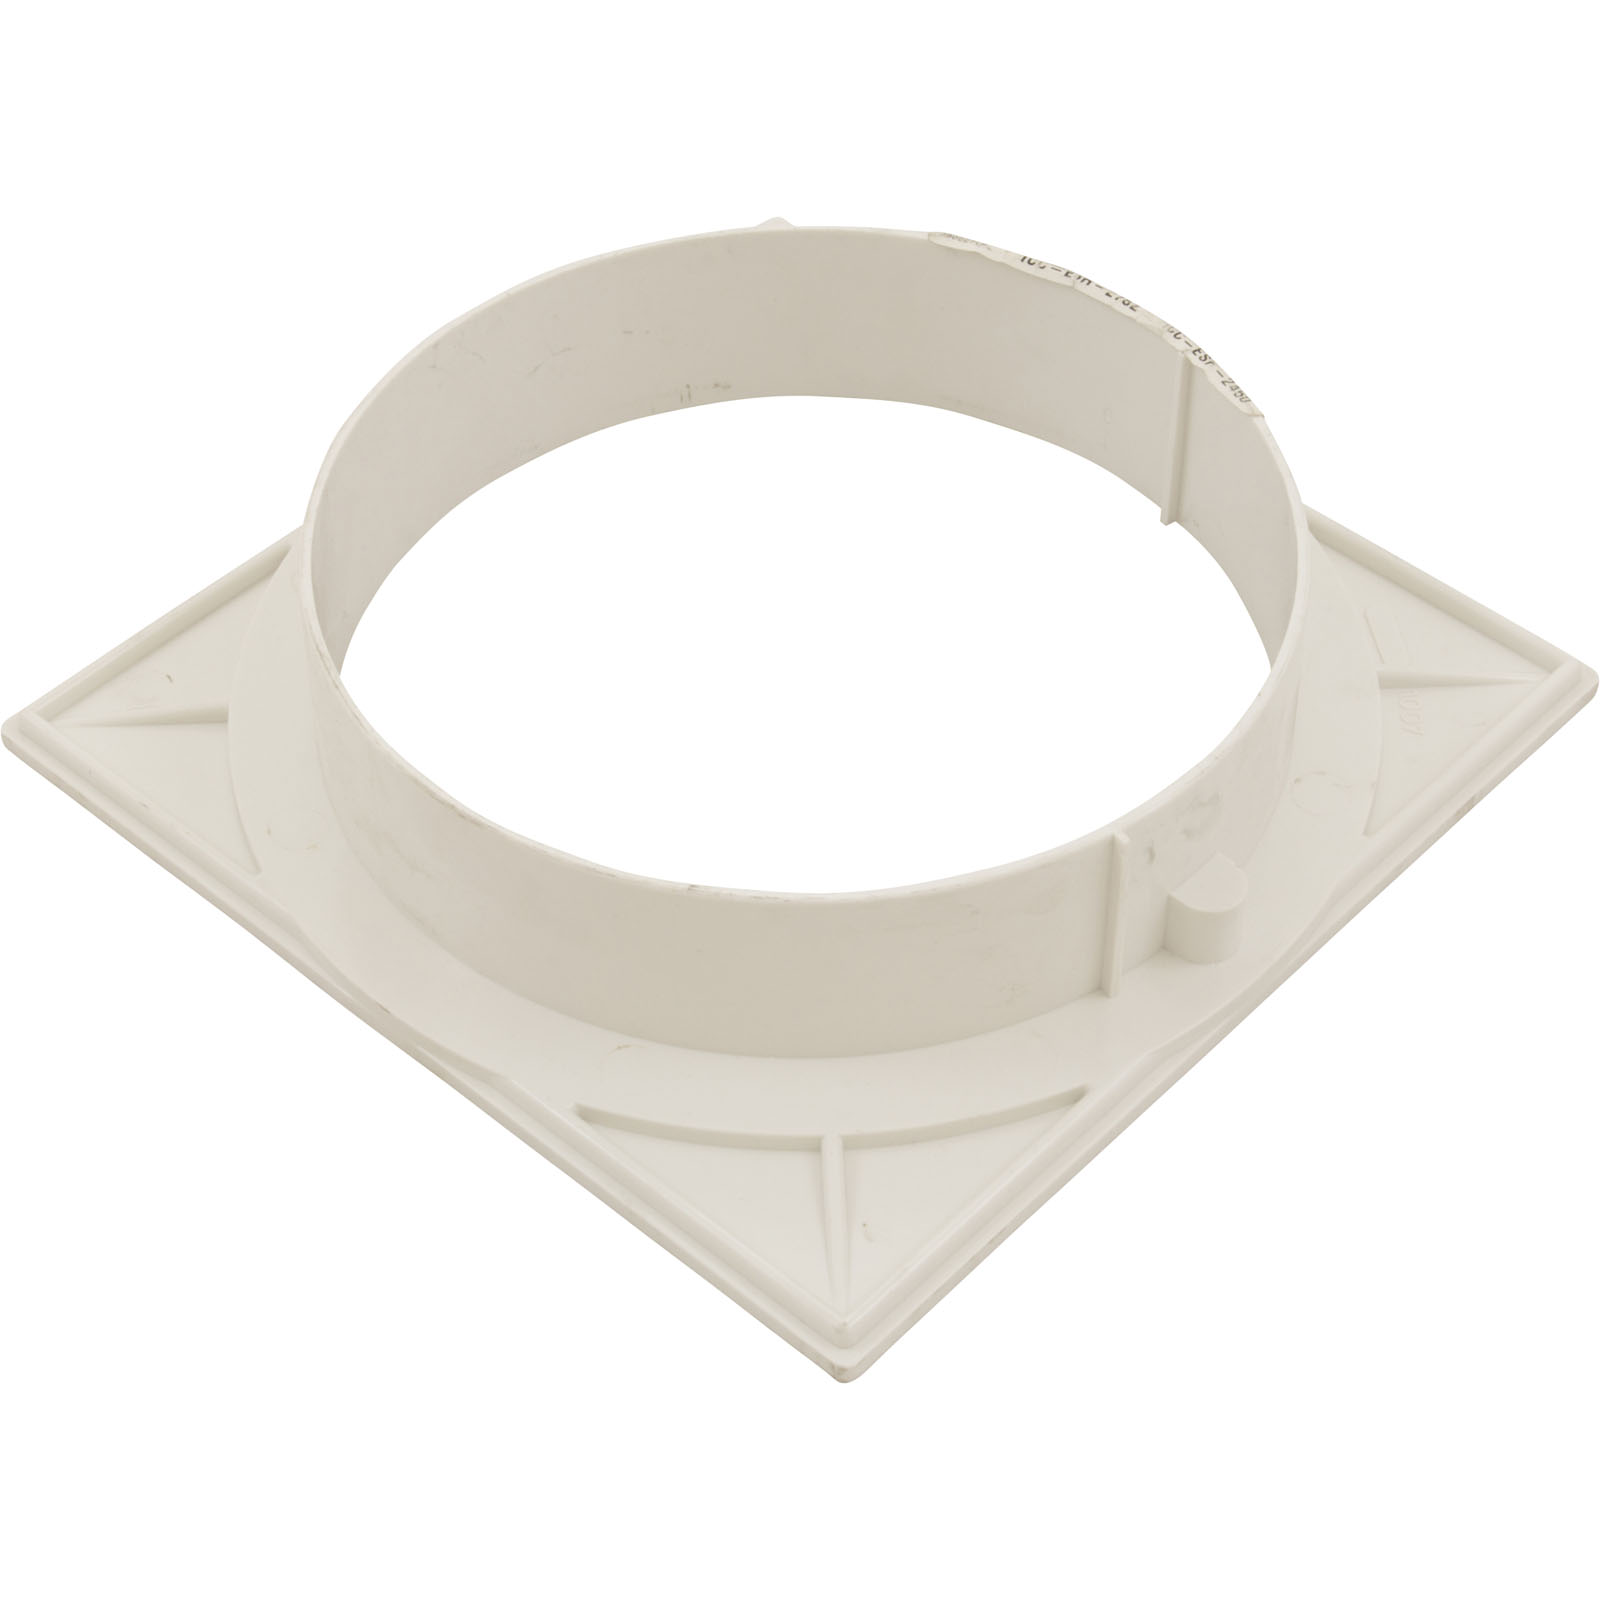 Picture of 19-0164-1 Skimmer Collar Kafko Square Extension White